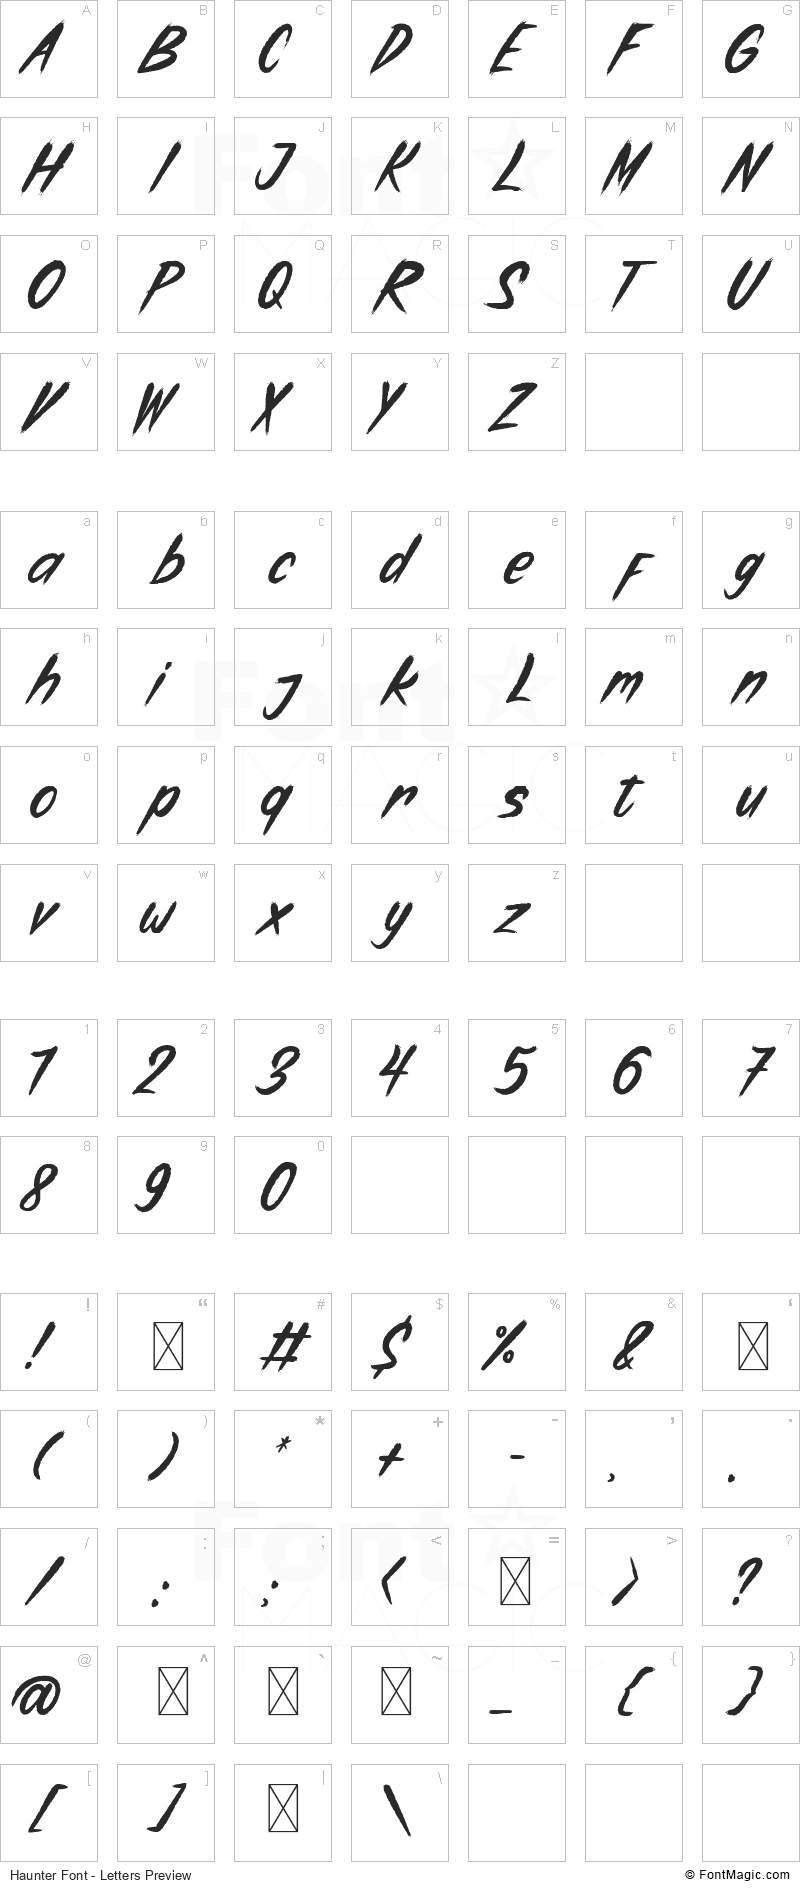 Haunter Font - All Latters Preview Chart